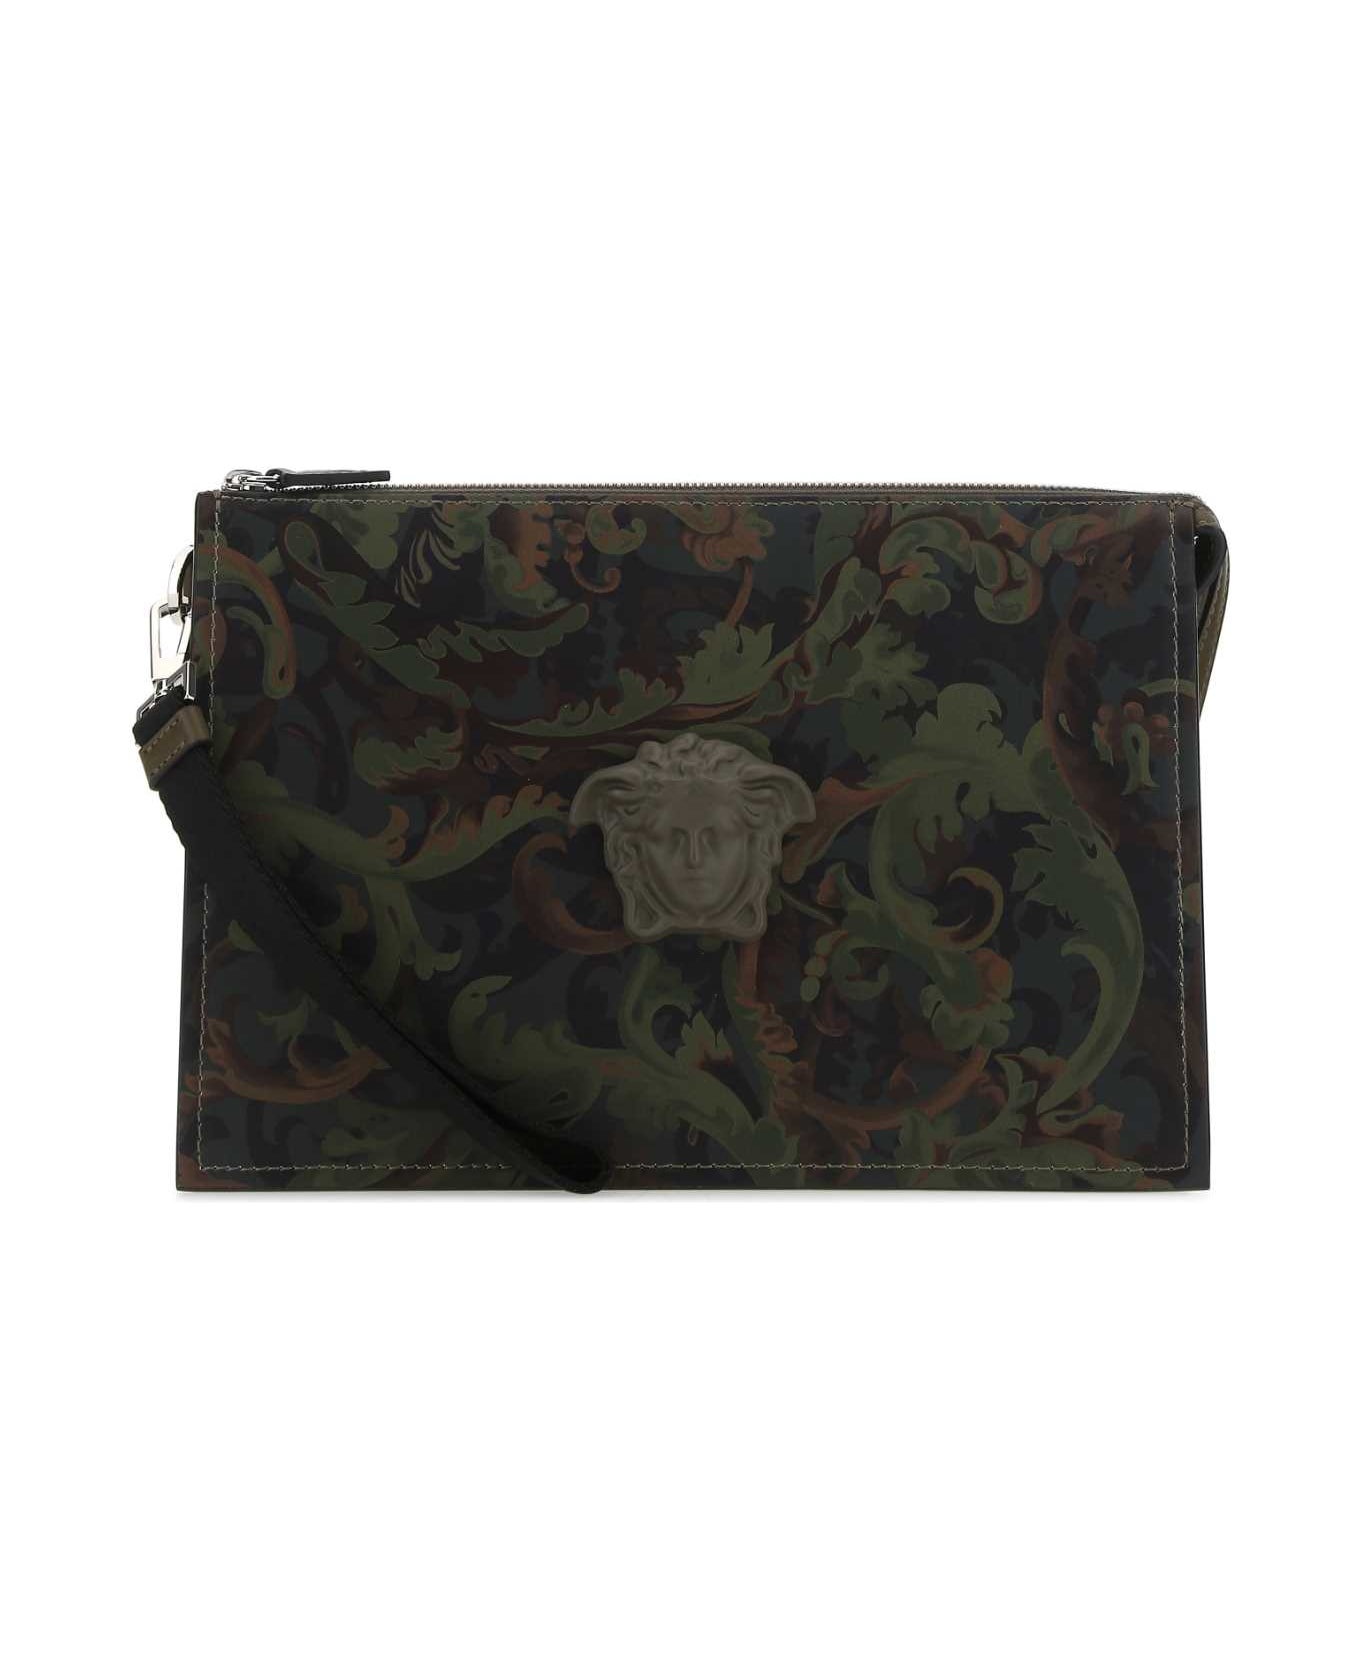 Versace Printed Leather Clutch - 5K00P